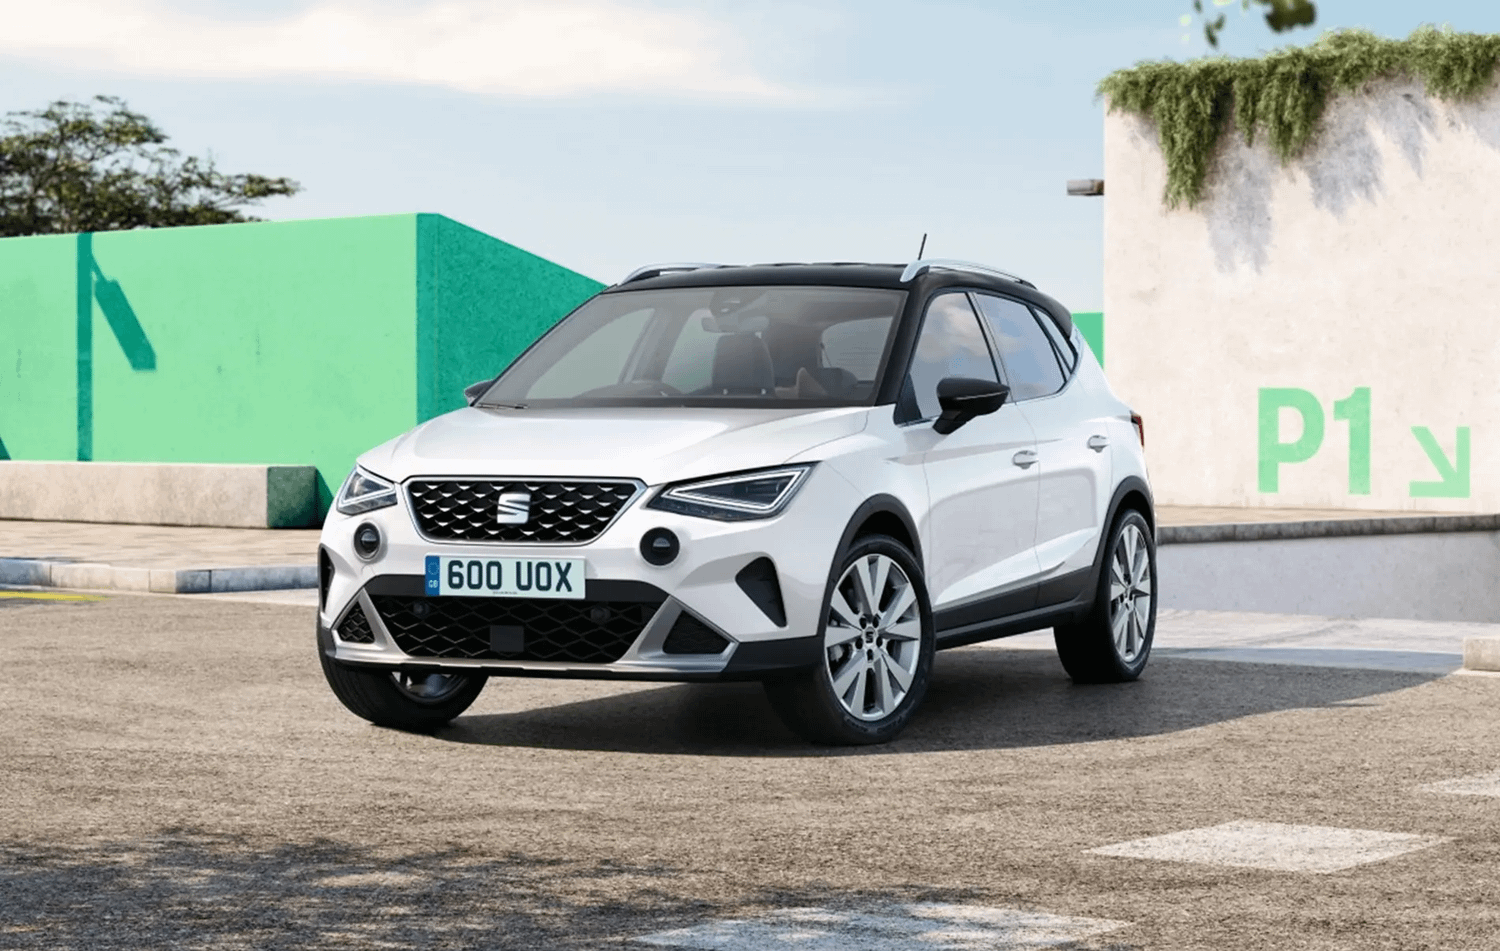 SEAT Arona front view